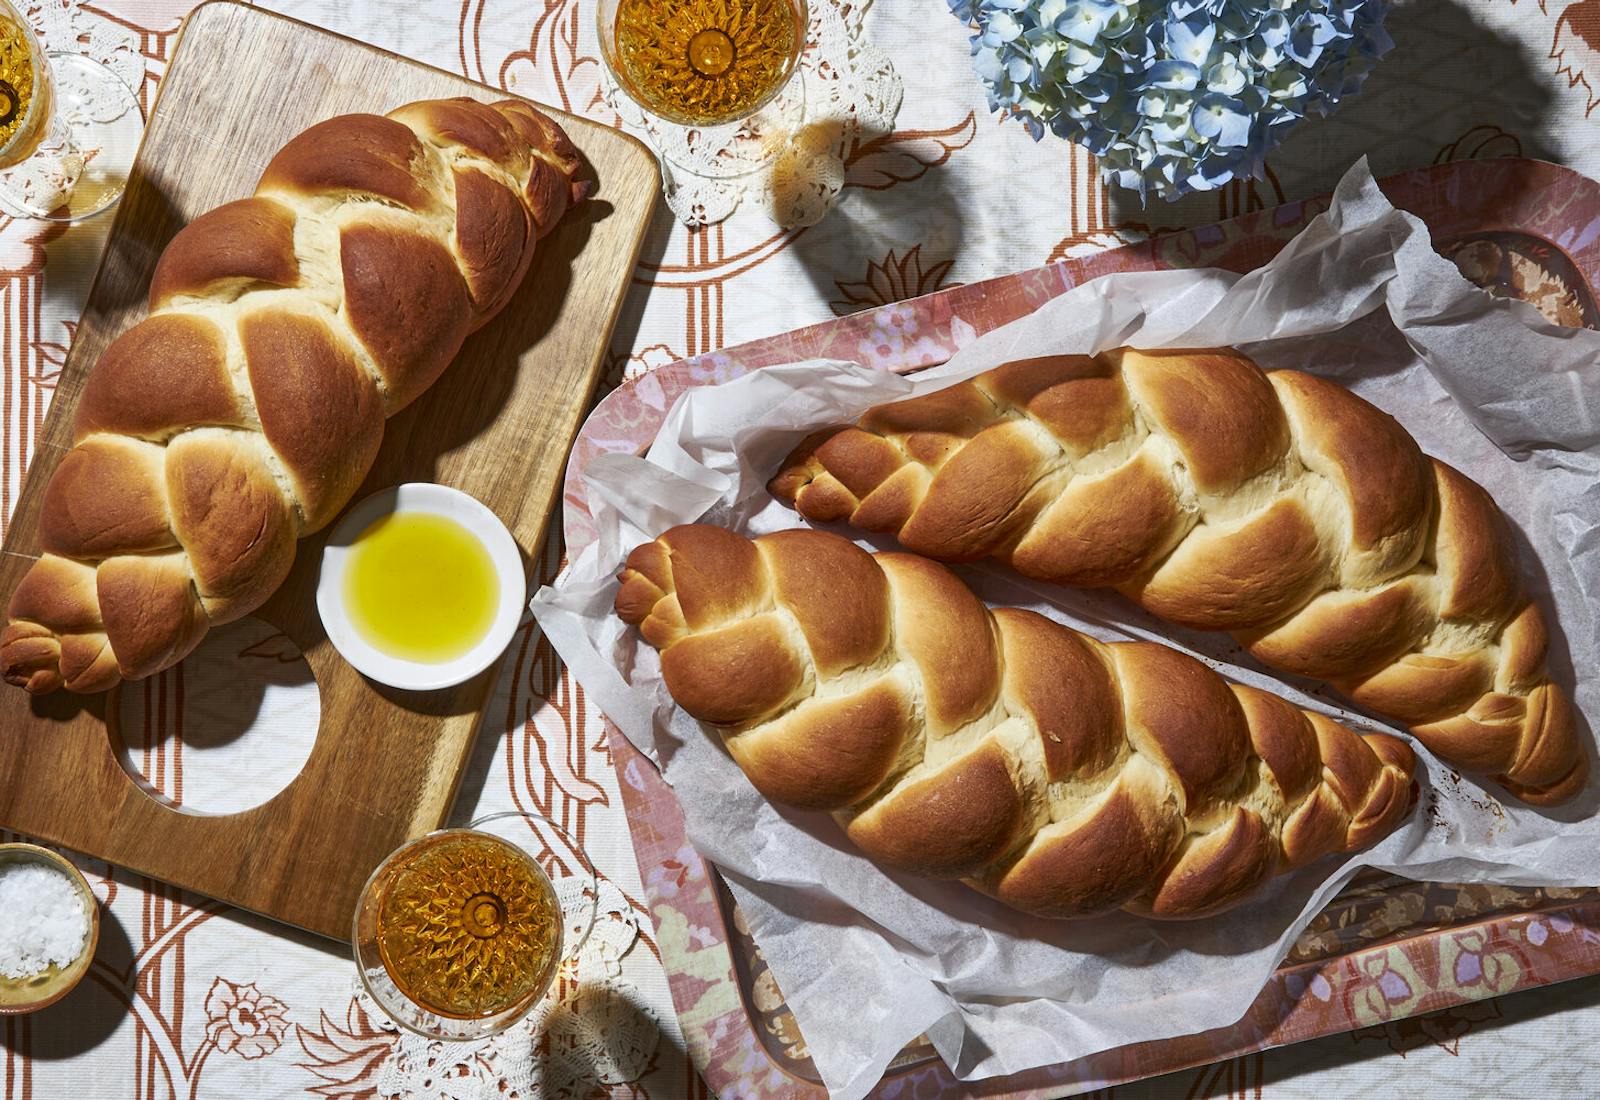 Three loaves of water challah with dishes of maple syrup and coarse salt, glasses of white wine, and fresh flowers.